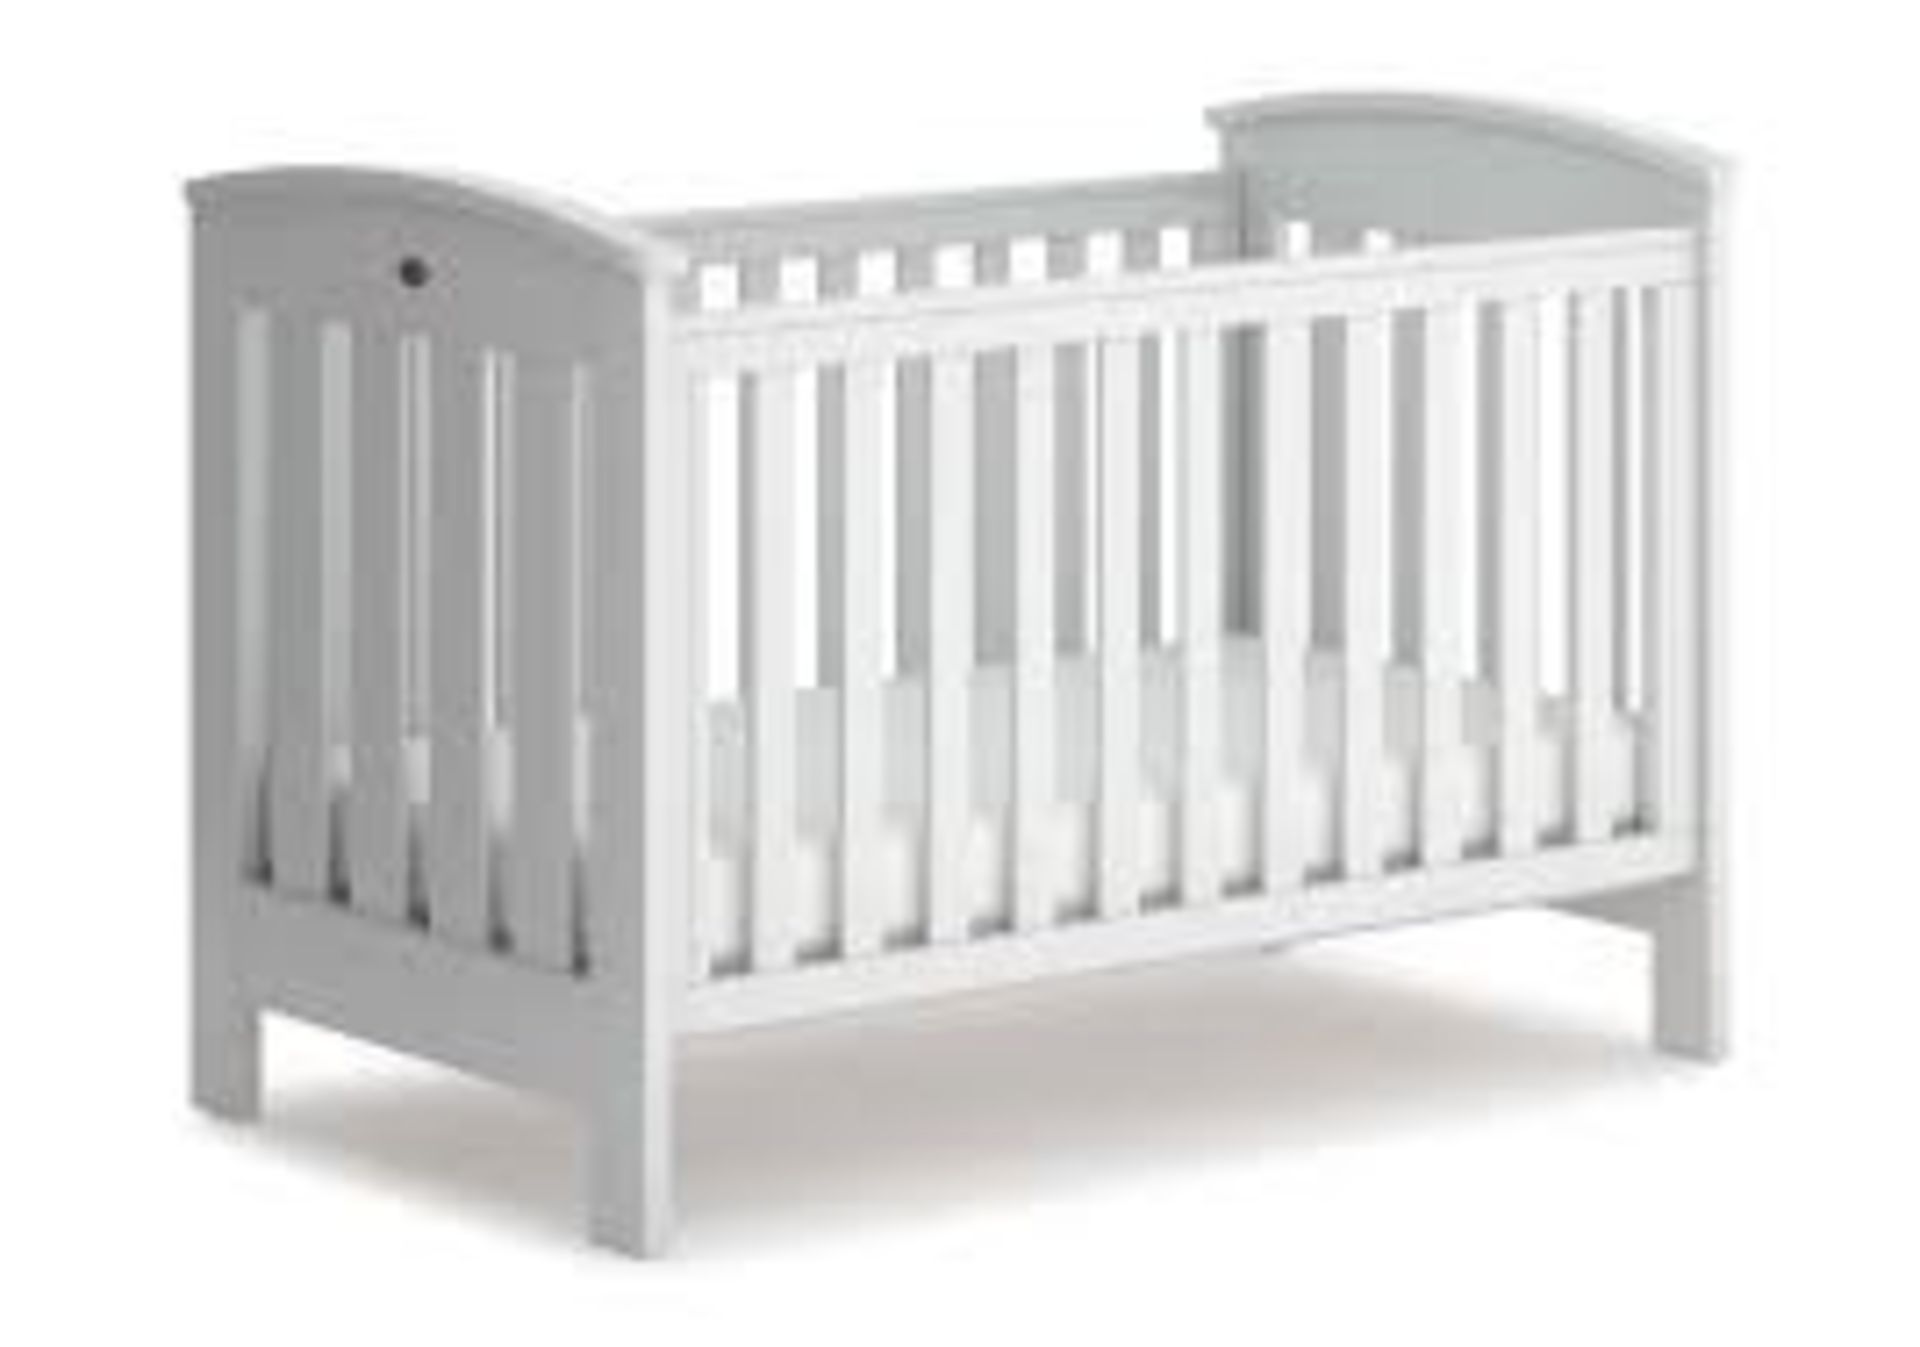 Boxed Solid Wooden Childrens Cot Bed (May have Pack Damage) RRP £140 (PICTURES ARE FOR